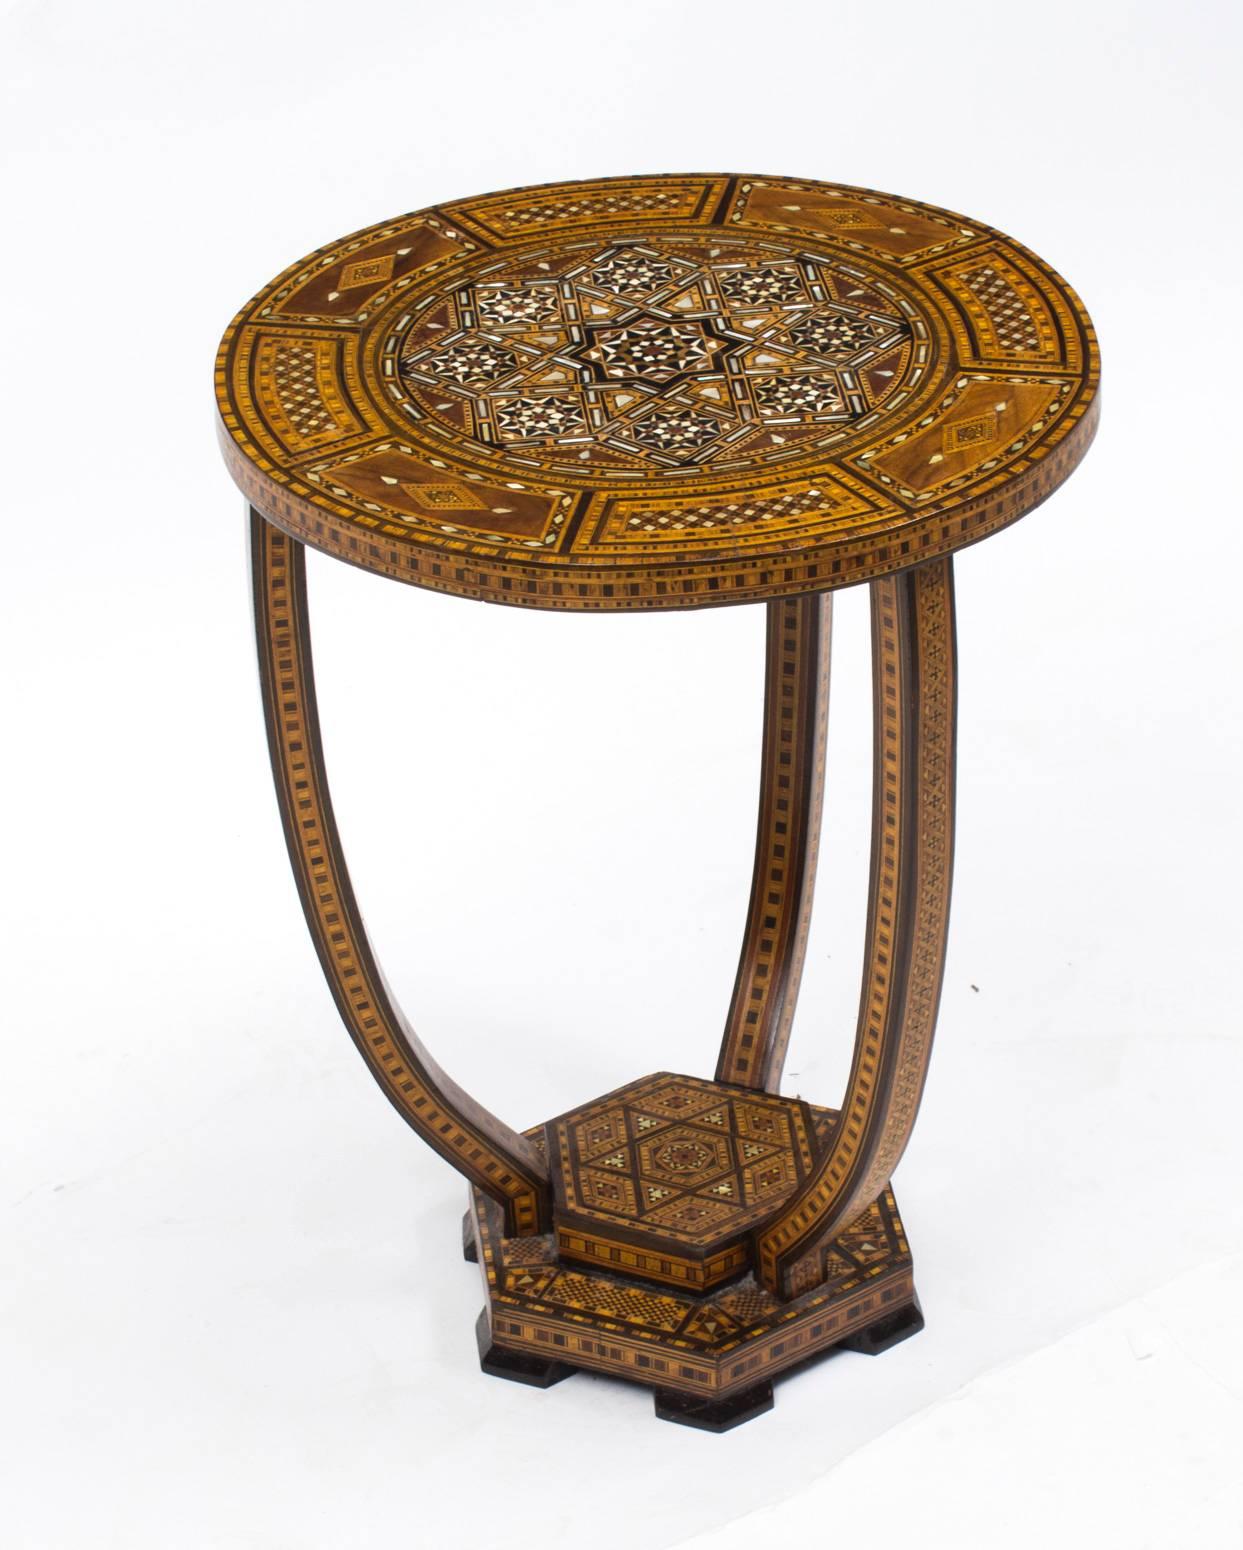 This is a beautiful antique Syrian hardwood inlaid occasional table, dating from the early 20th century.

The table is exquisitely handcrafted with beautiful geometric patterns.

It features wonderful inlaid decoration comprising ebony, walnut,